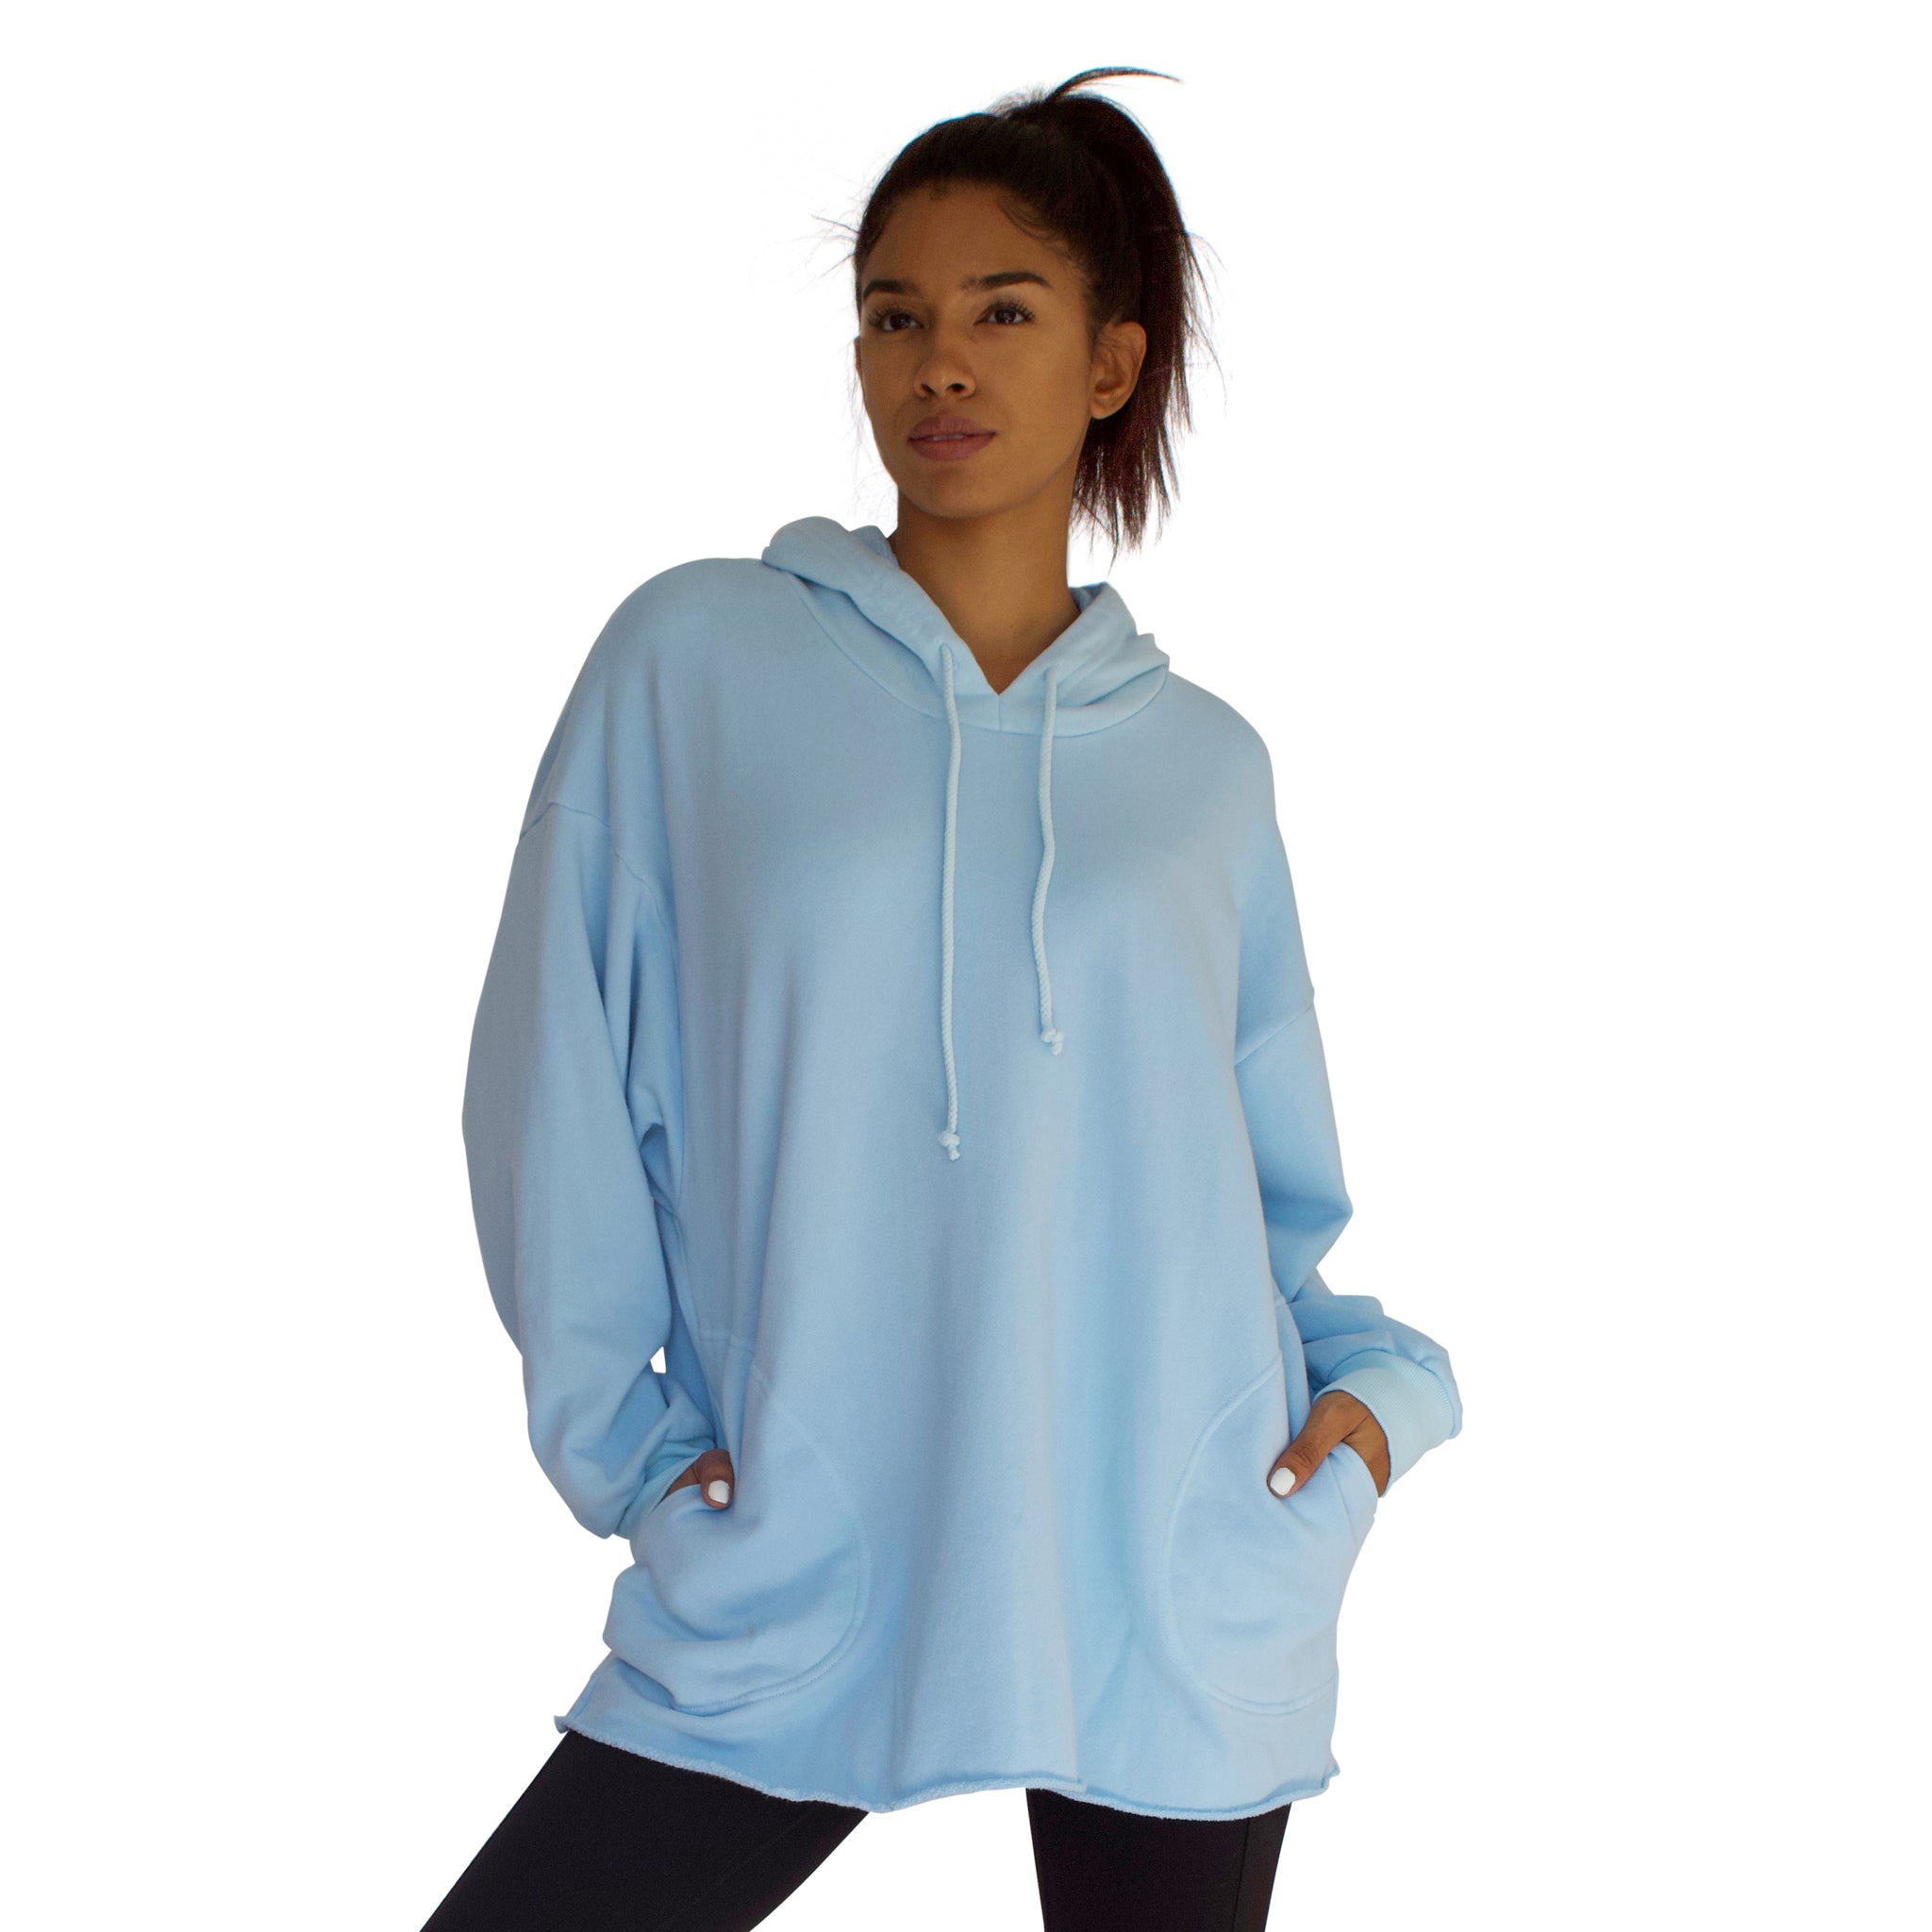 CC stands for comfy and cozy which describes the 100% cotton French Terry CC Beach Hoodie Pullover perfectly, shown here in Sky Blue